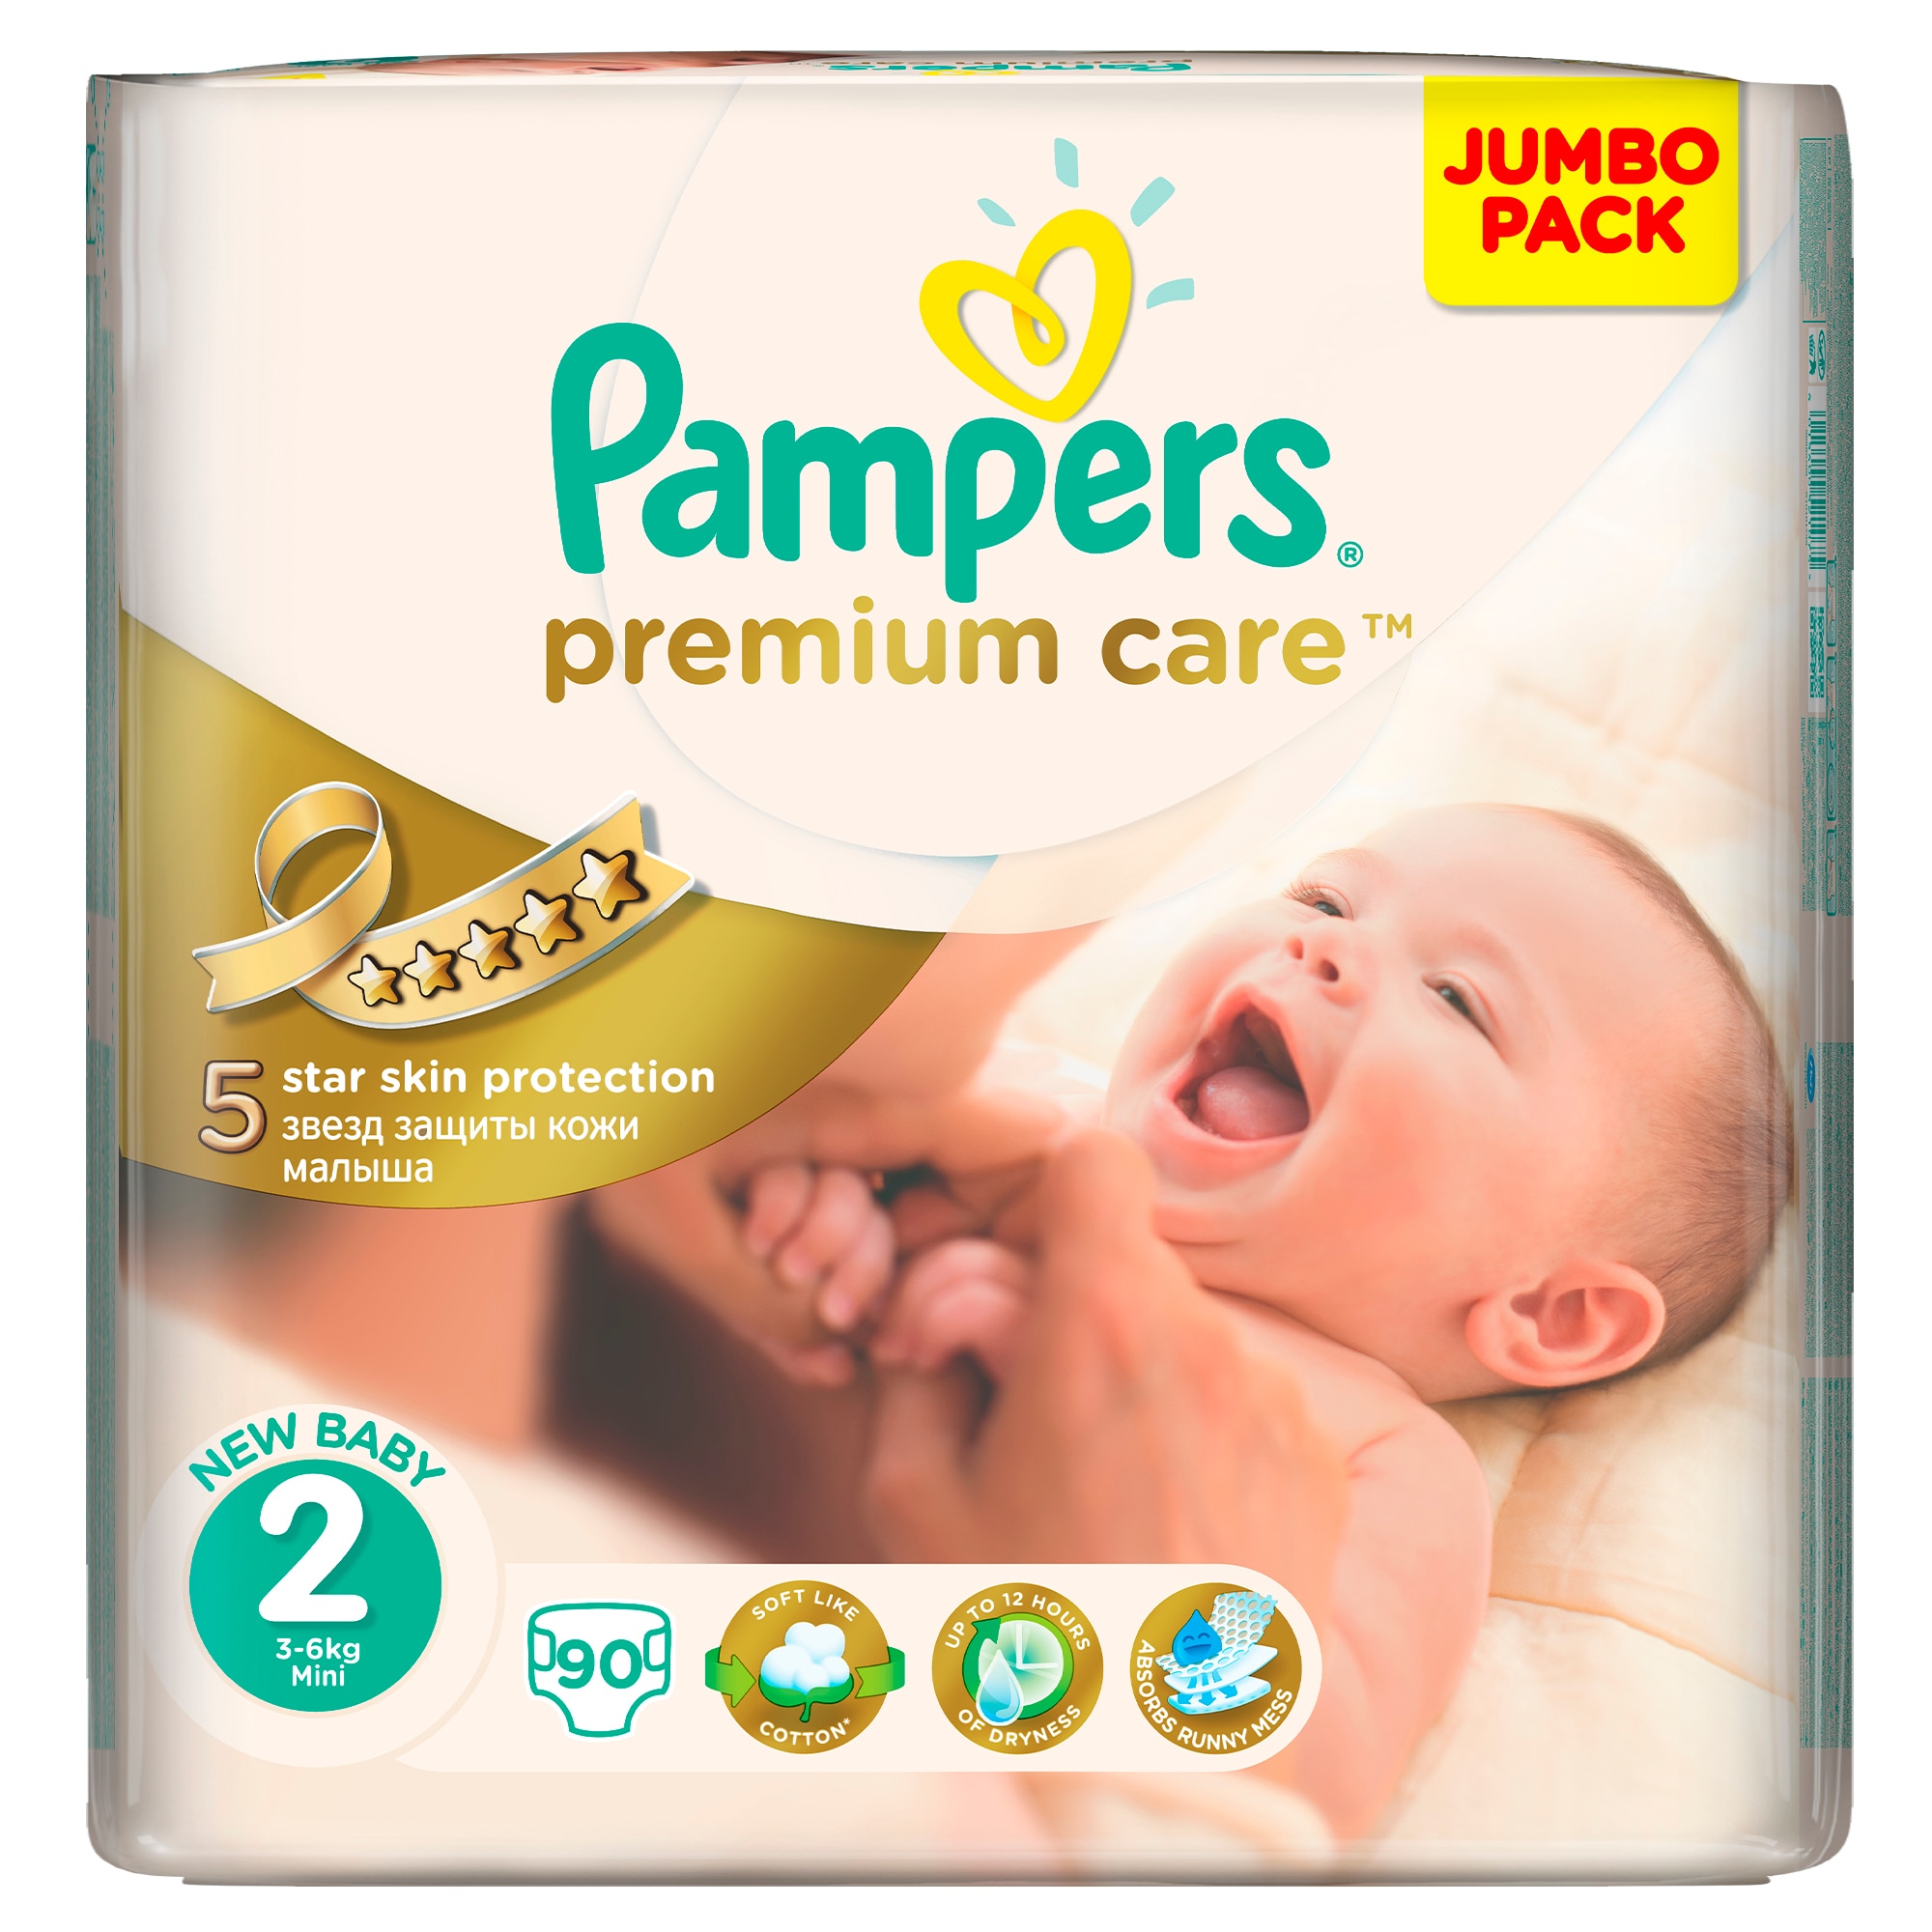 pampers procare 1 allegro